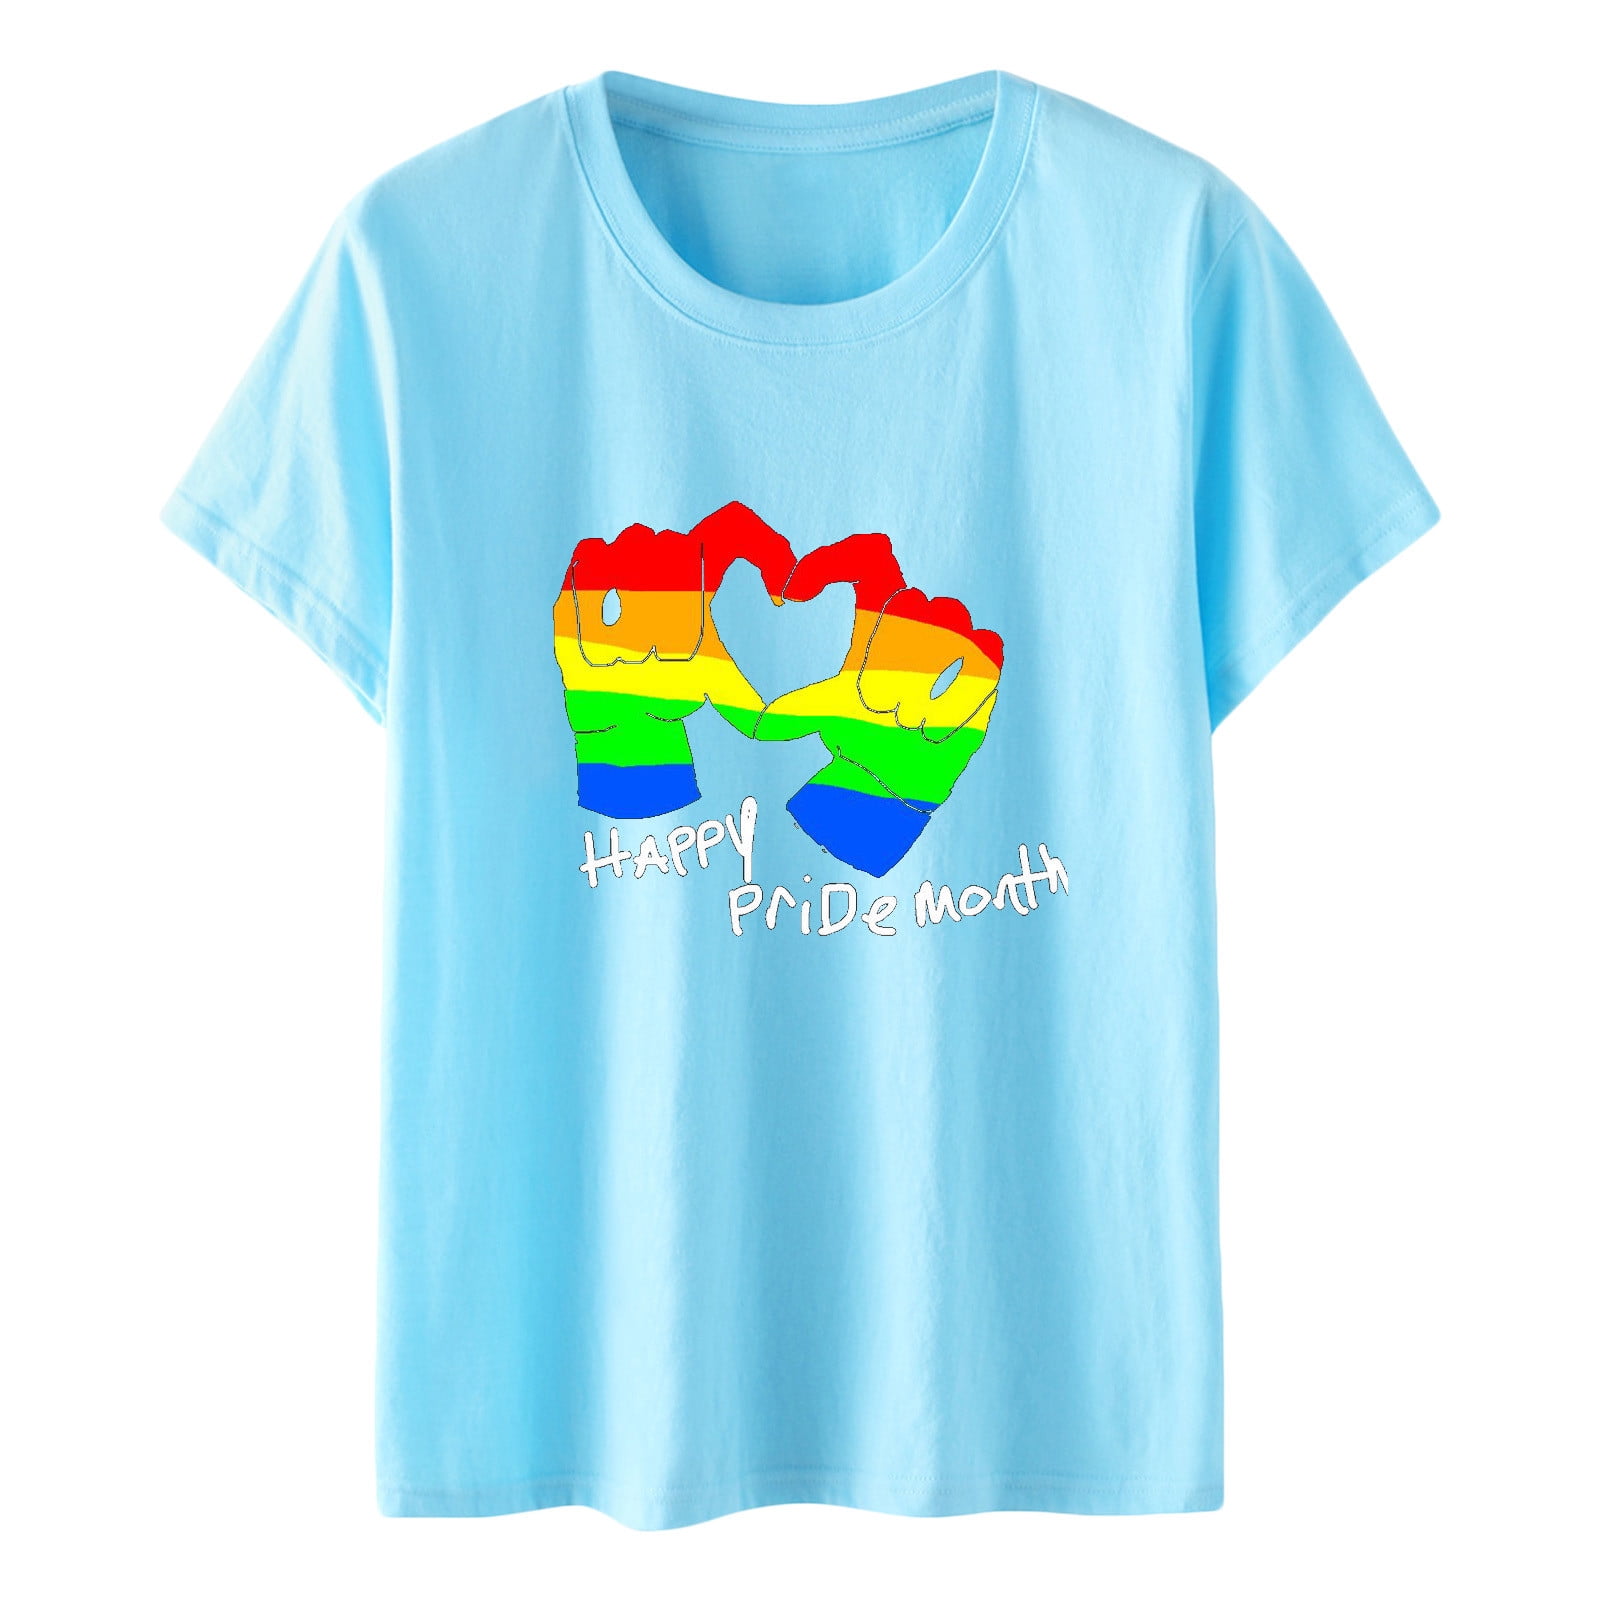 Official MLB Pride Collection Gear, MLB Pride, Rainbow Tees, Apparel